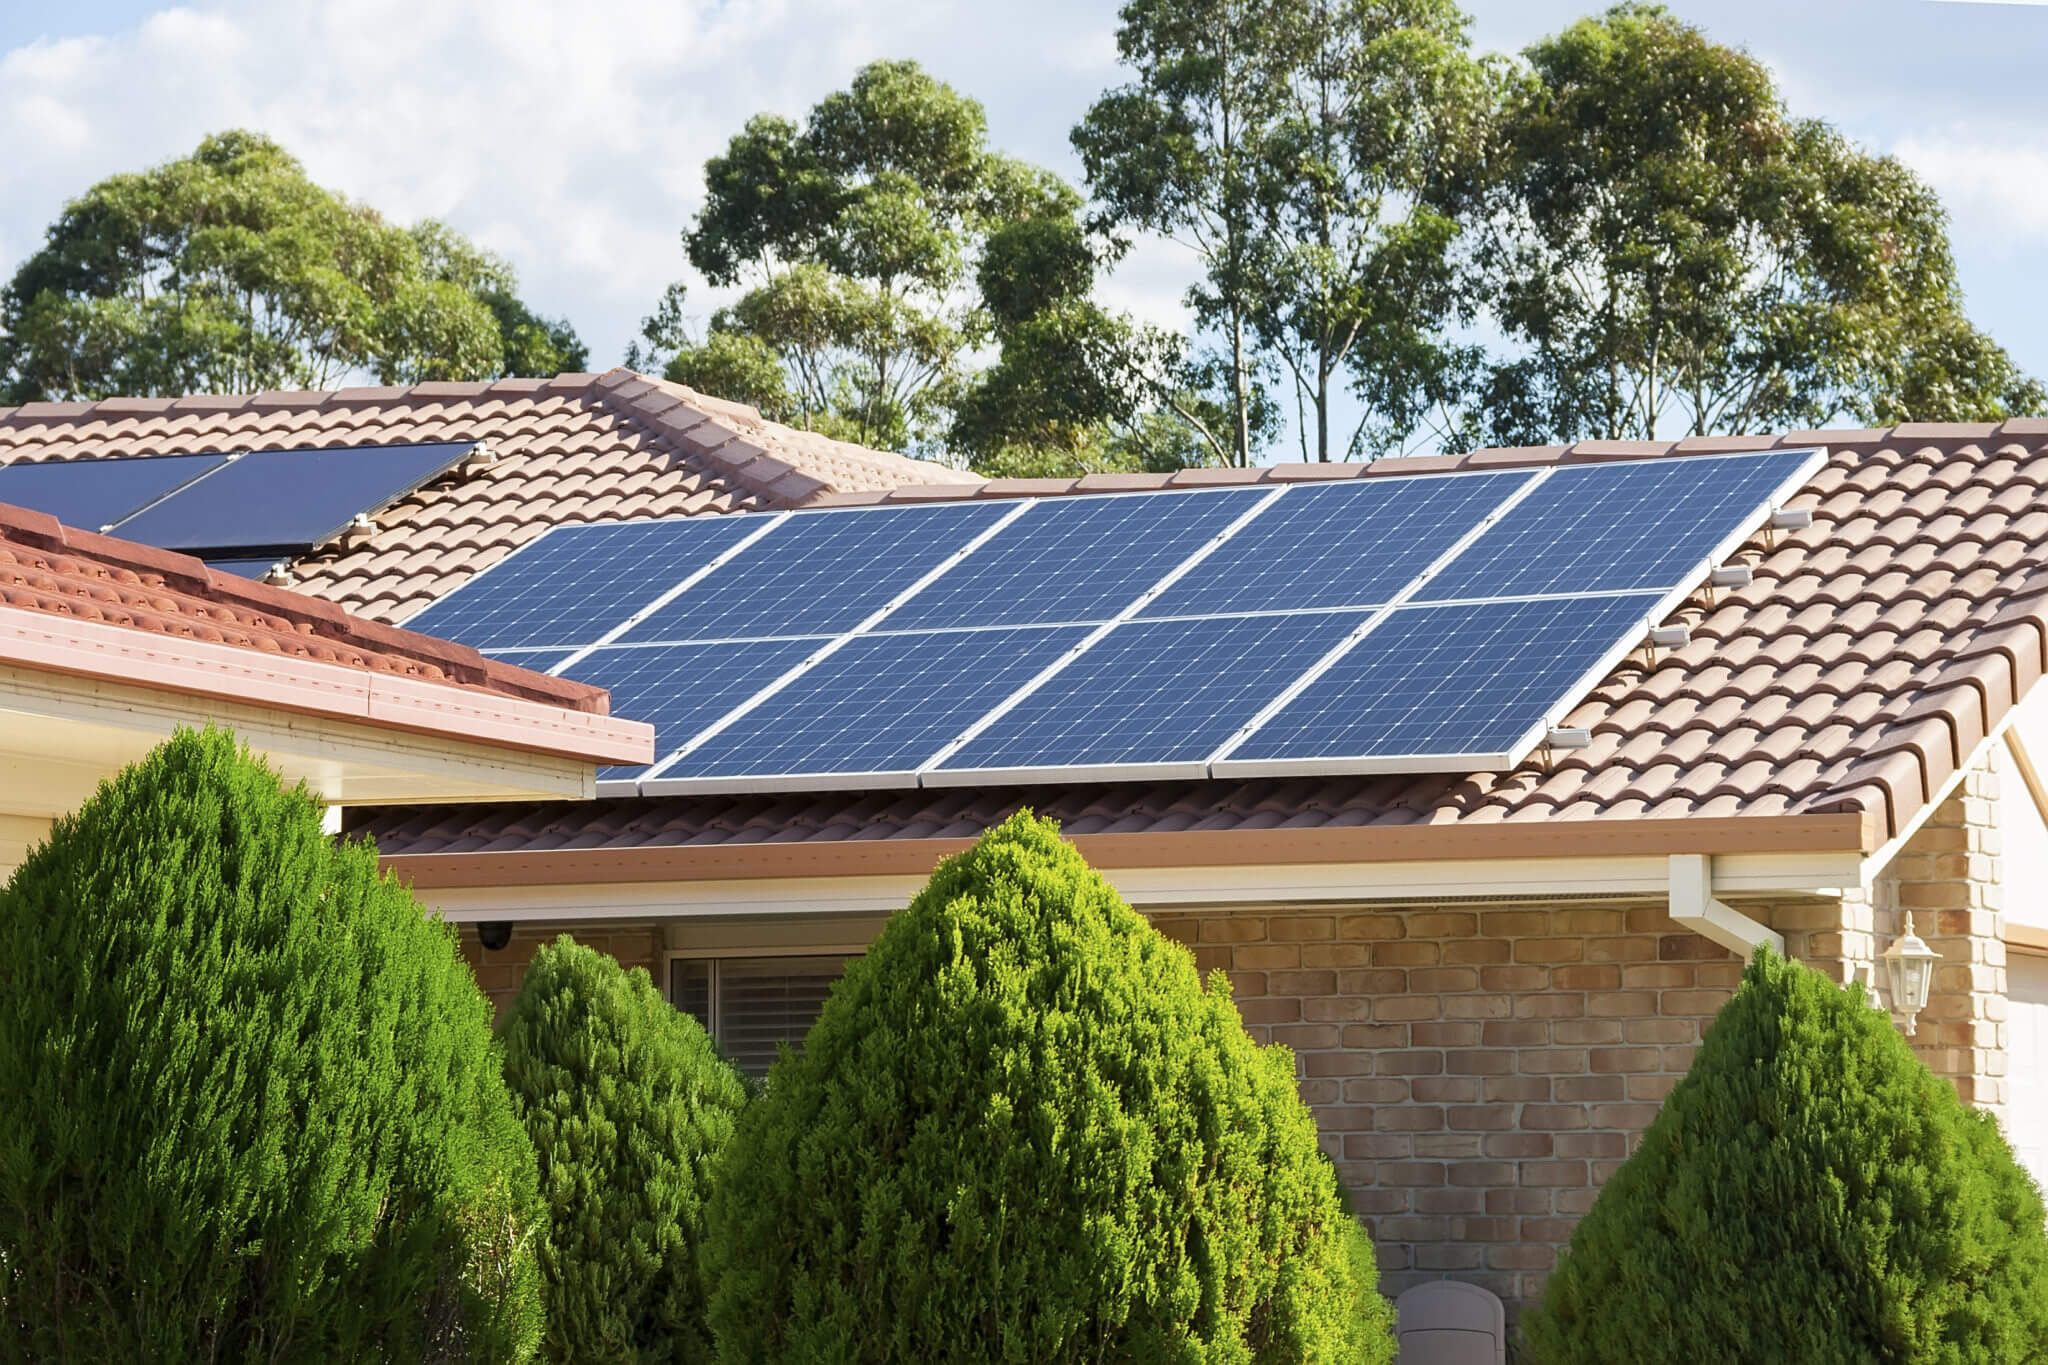 Will A Solar-Powered Home Pay Off?